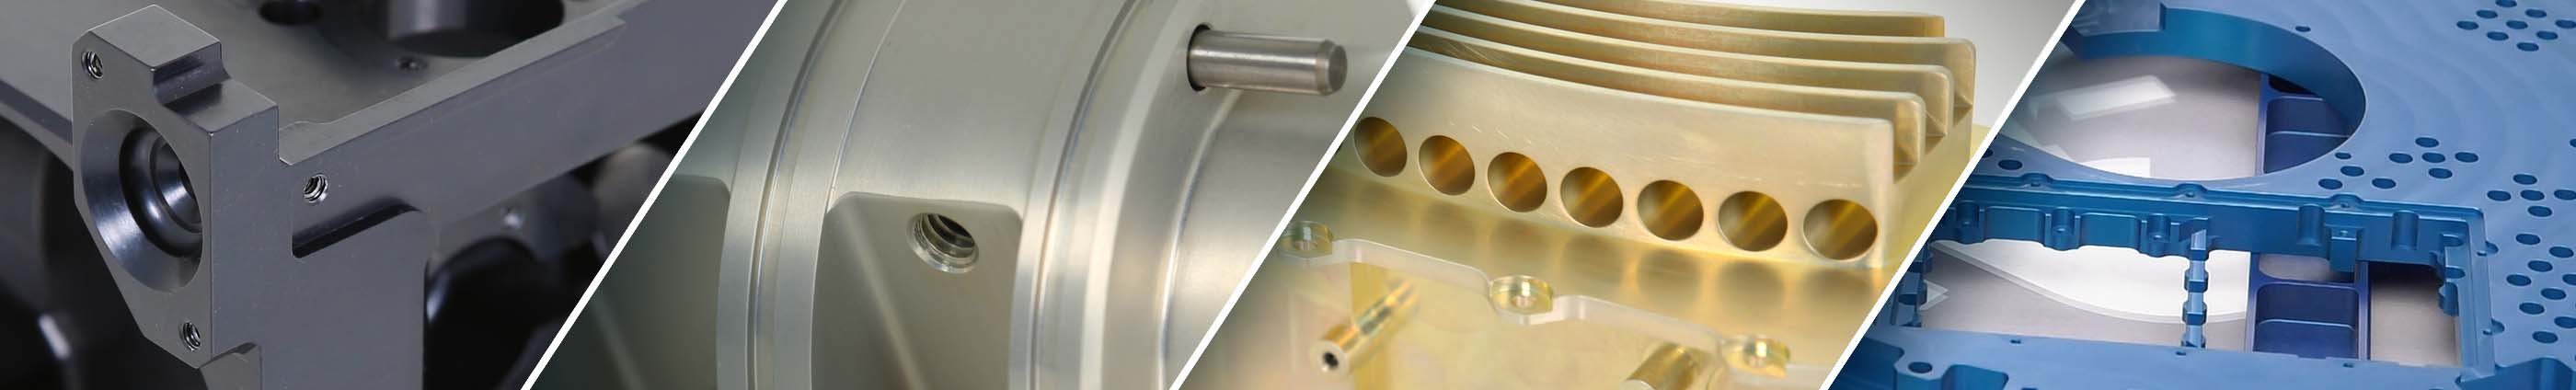 Precision manufactured parts in a range og metals and finishes